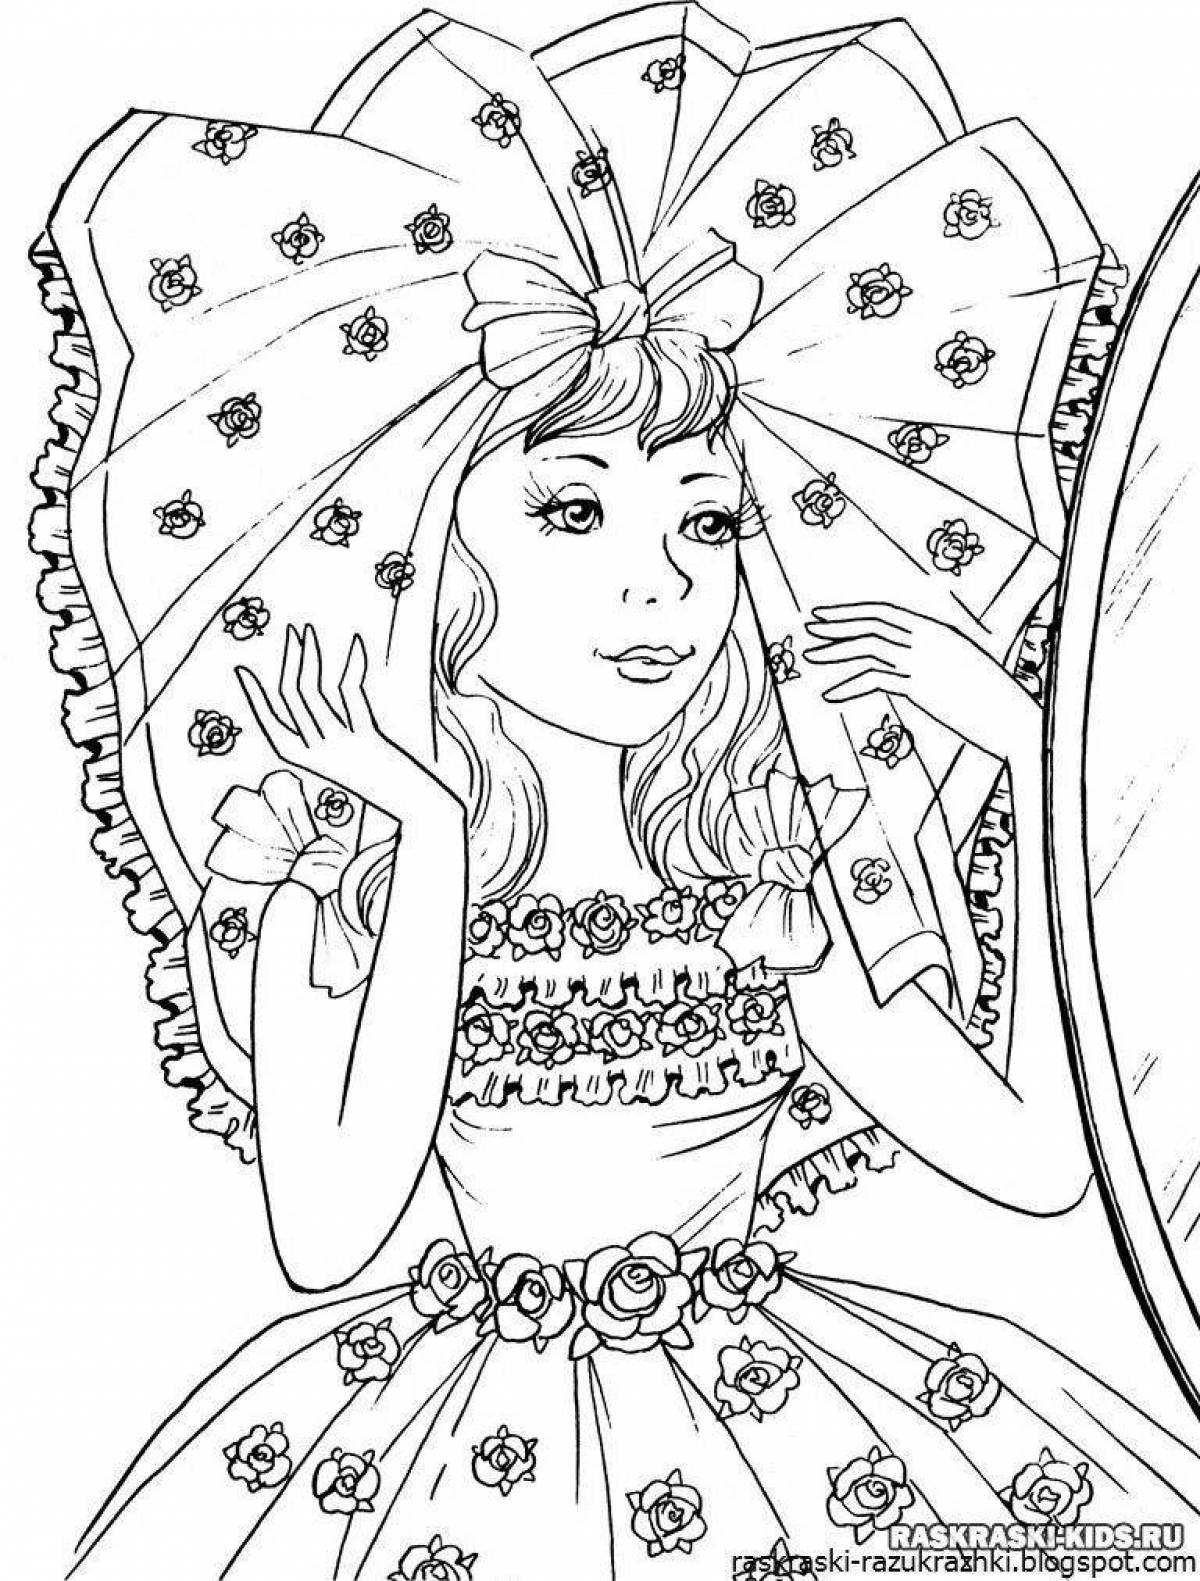 Creative coloring book for girls 7-8 years old